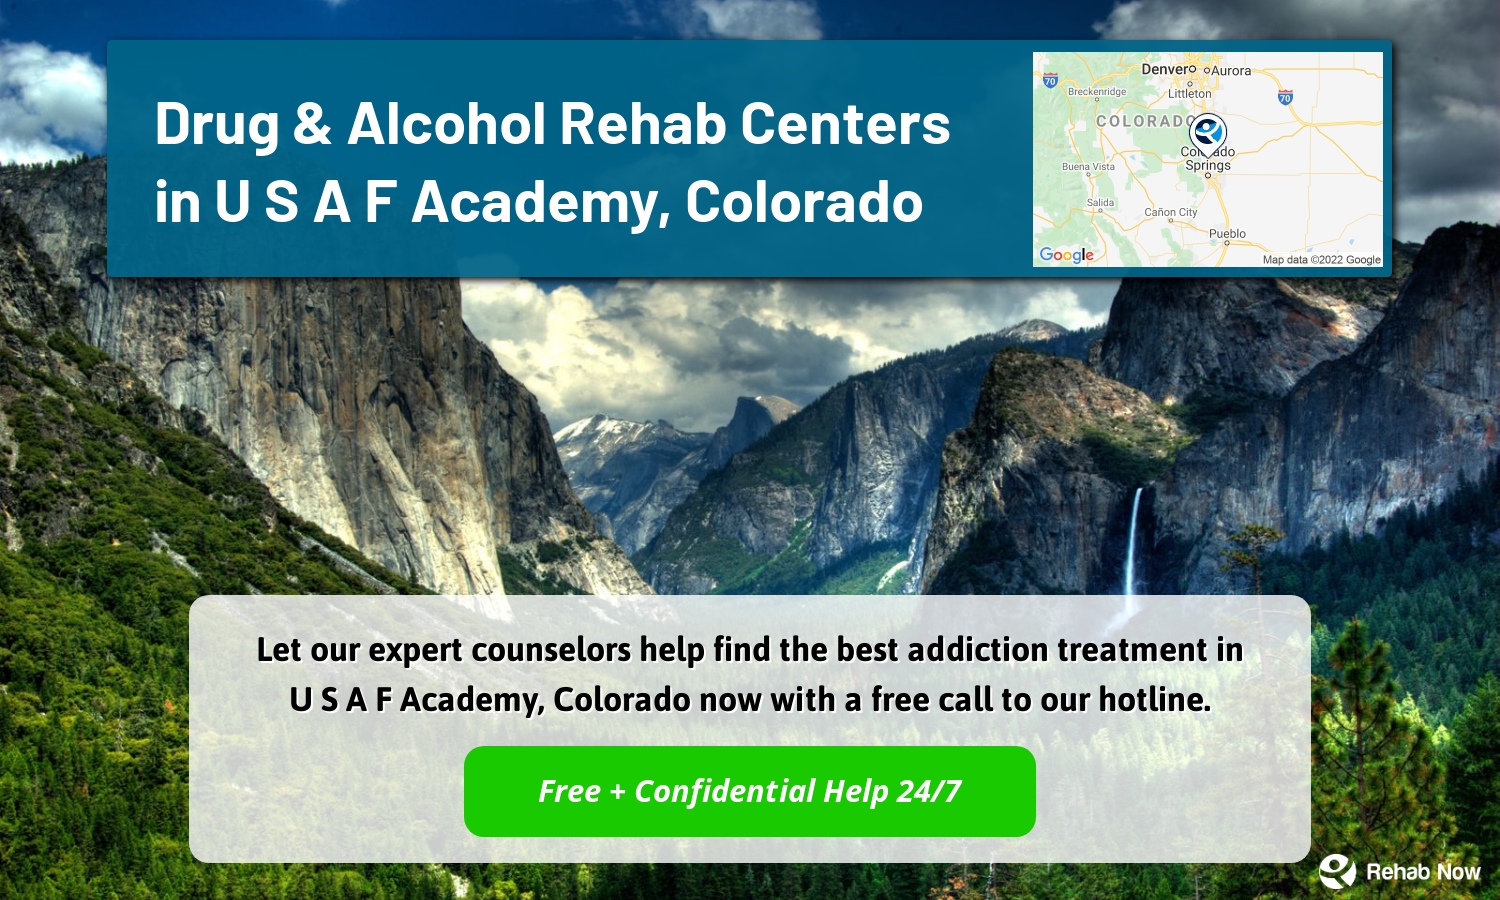 Let our expert counselors help find the best addiction treatment in U S A F Academy, Colorado now with a free call to our hotline.